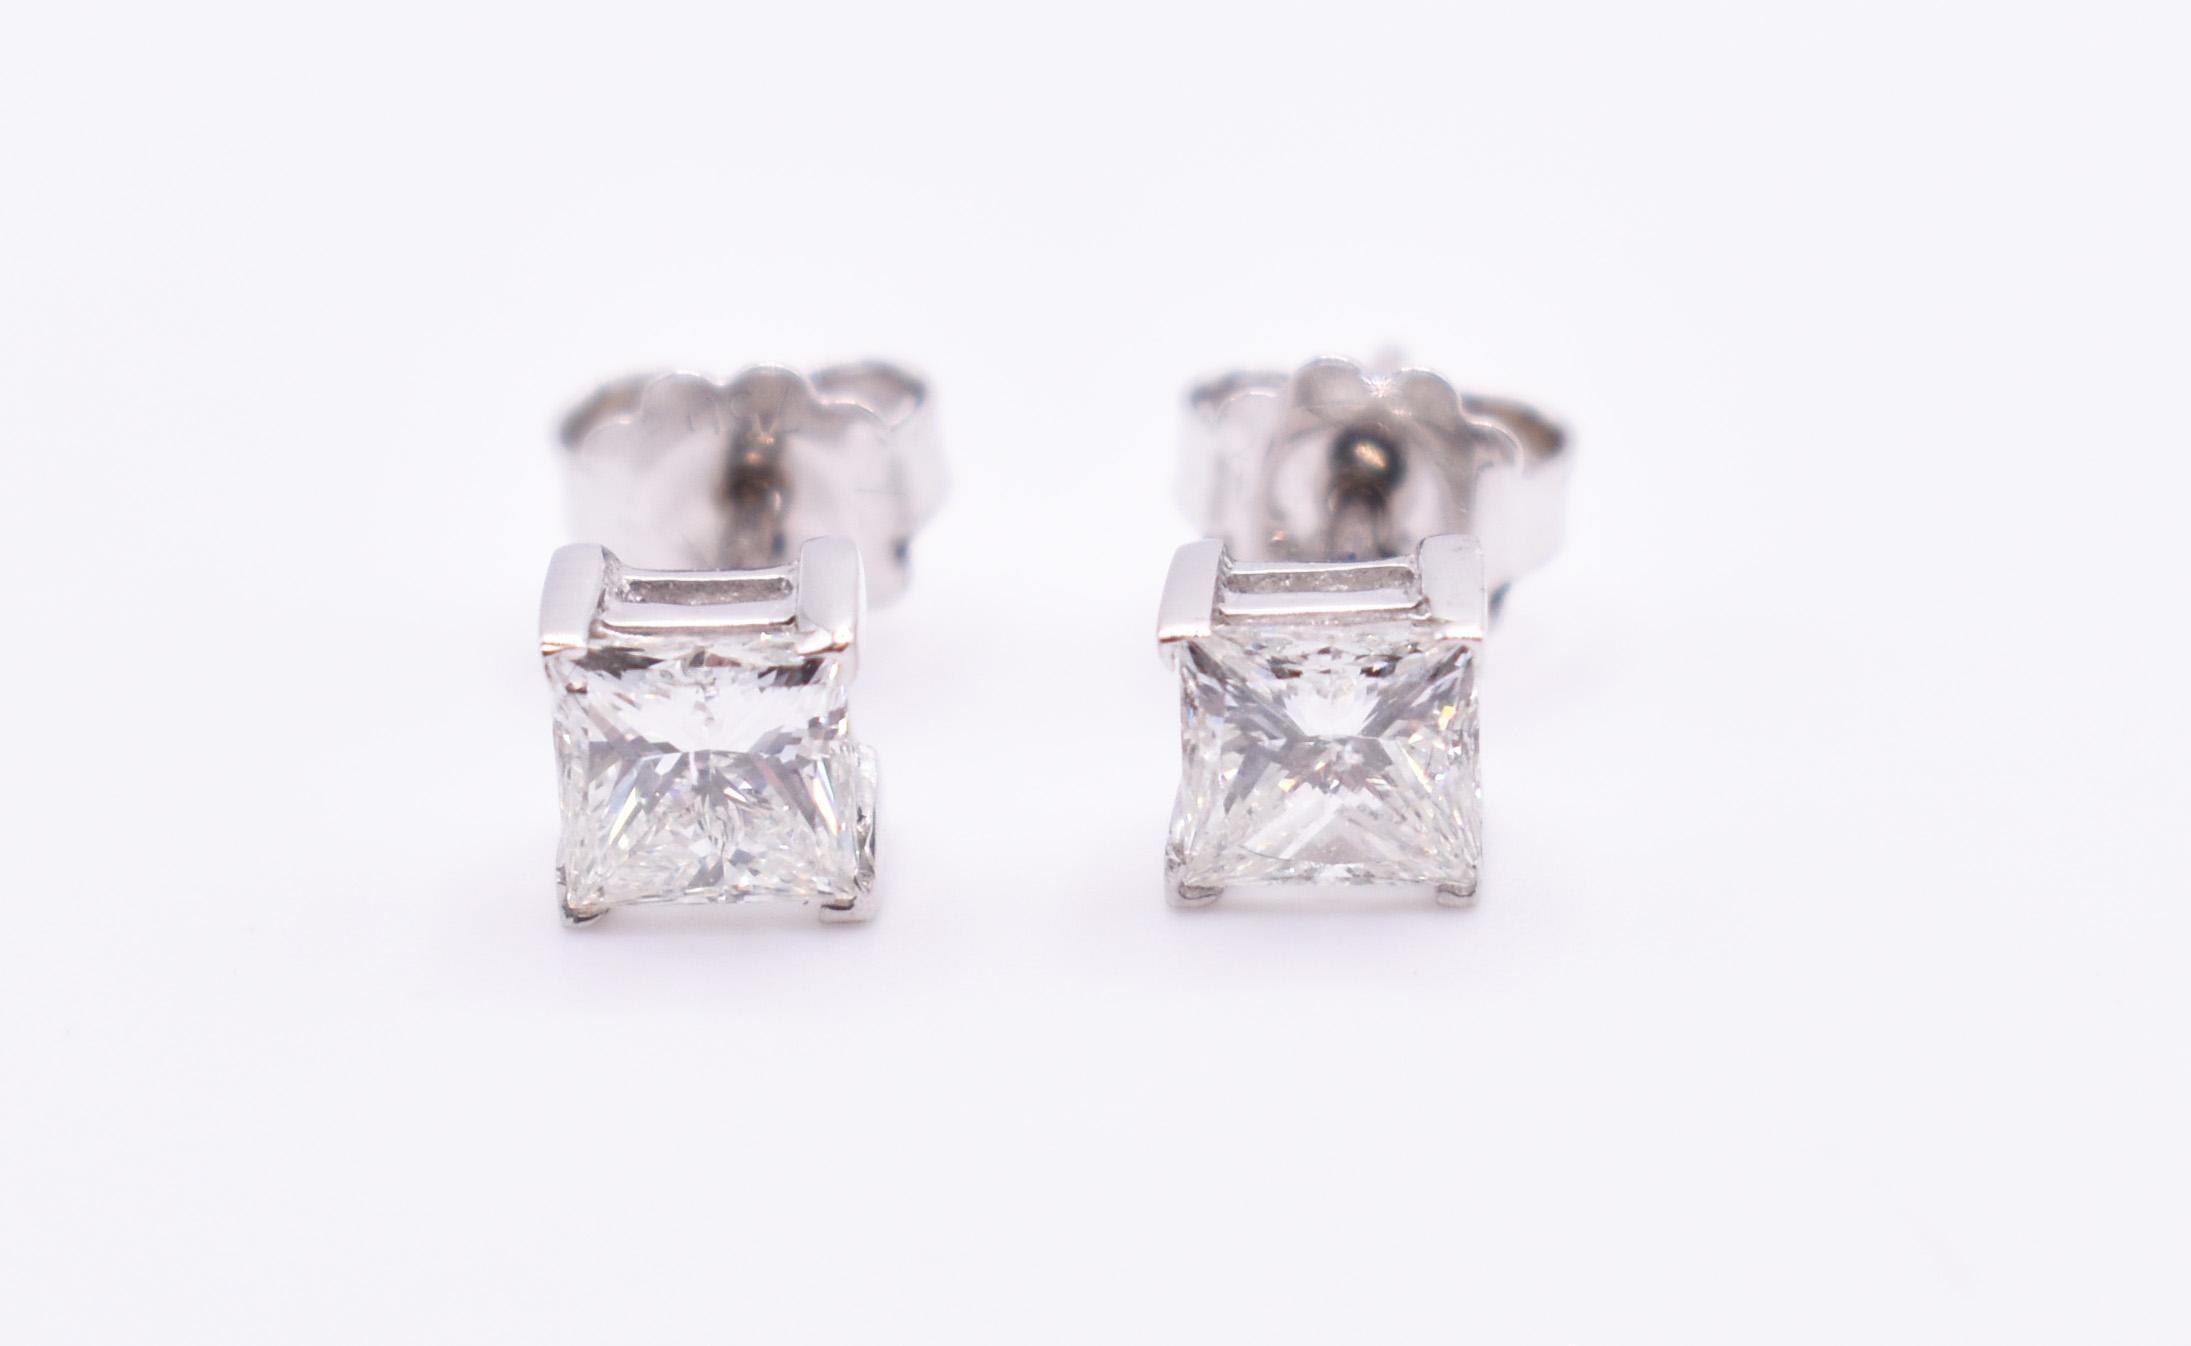 For sale is a splendid pair of GIA Certified Princess Cut Diamond Earrings, totaling 1.60cts. 

Metal: 18k White Gold
Total Carat Weight: 1.60ct
GIA Report No: 2225825518
                          7476187534